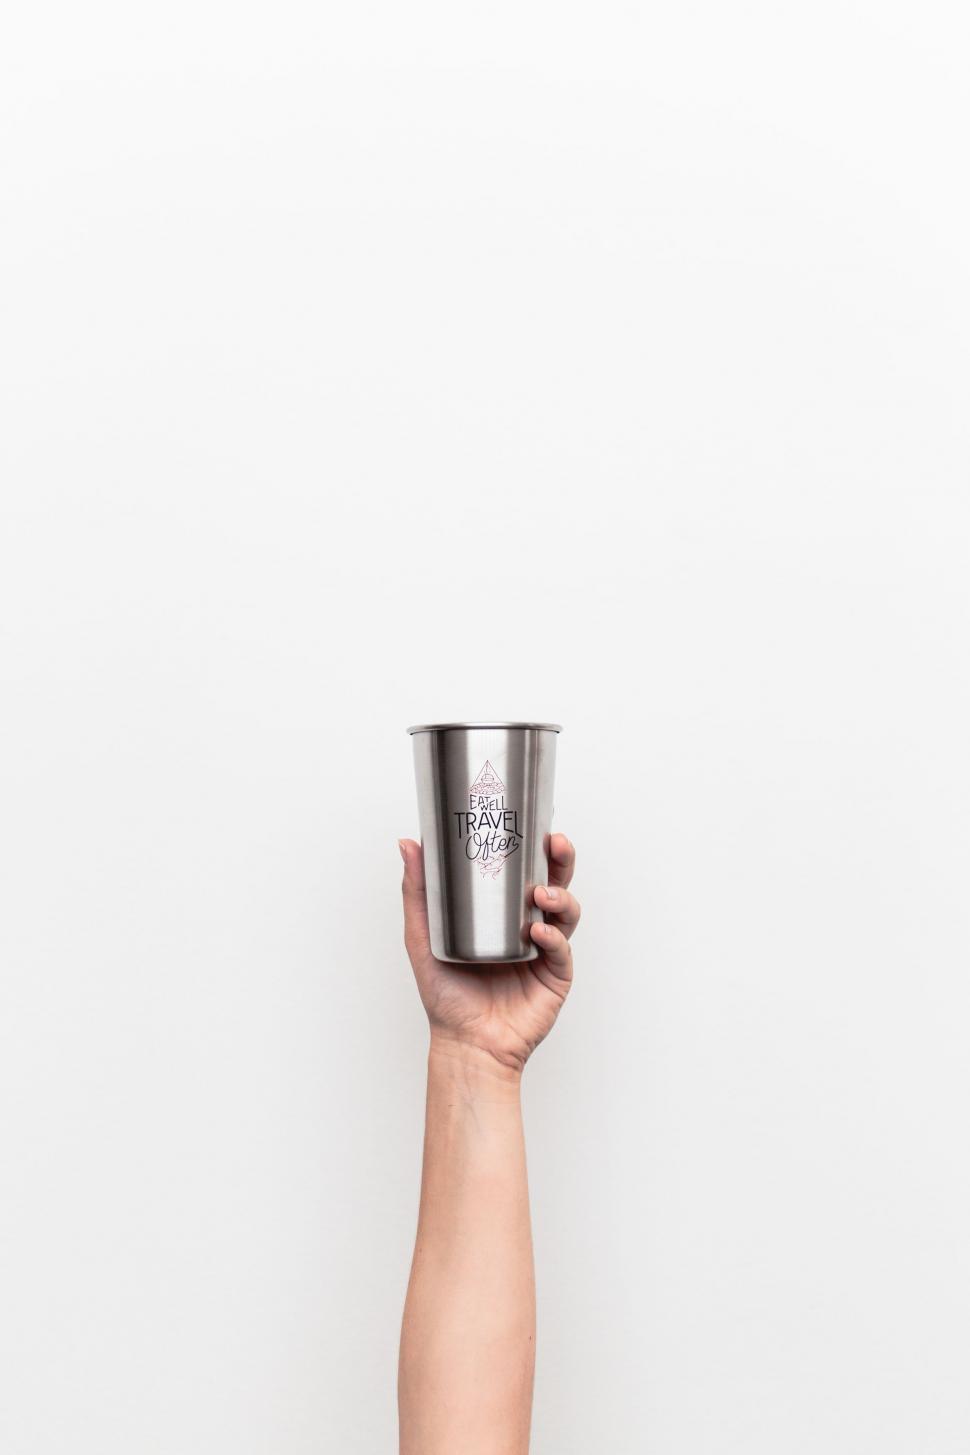 Free Image of Hand and Stainless Steel Cup 